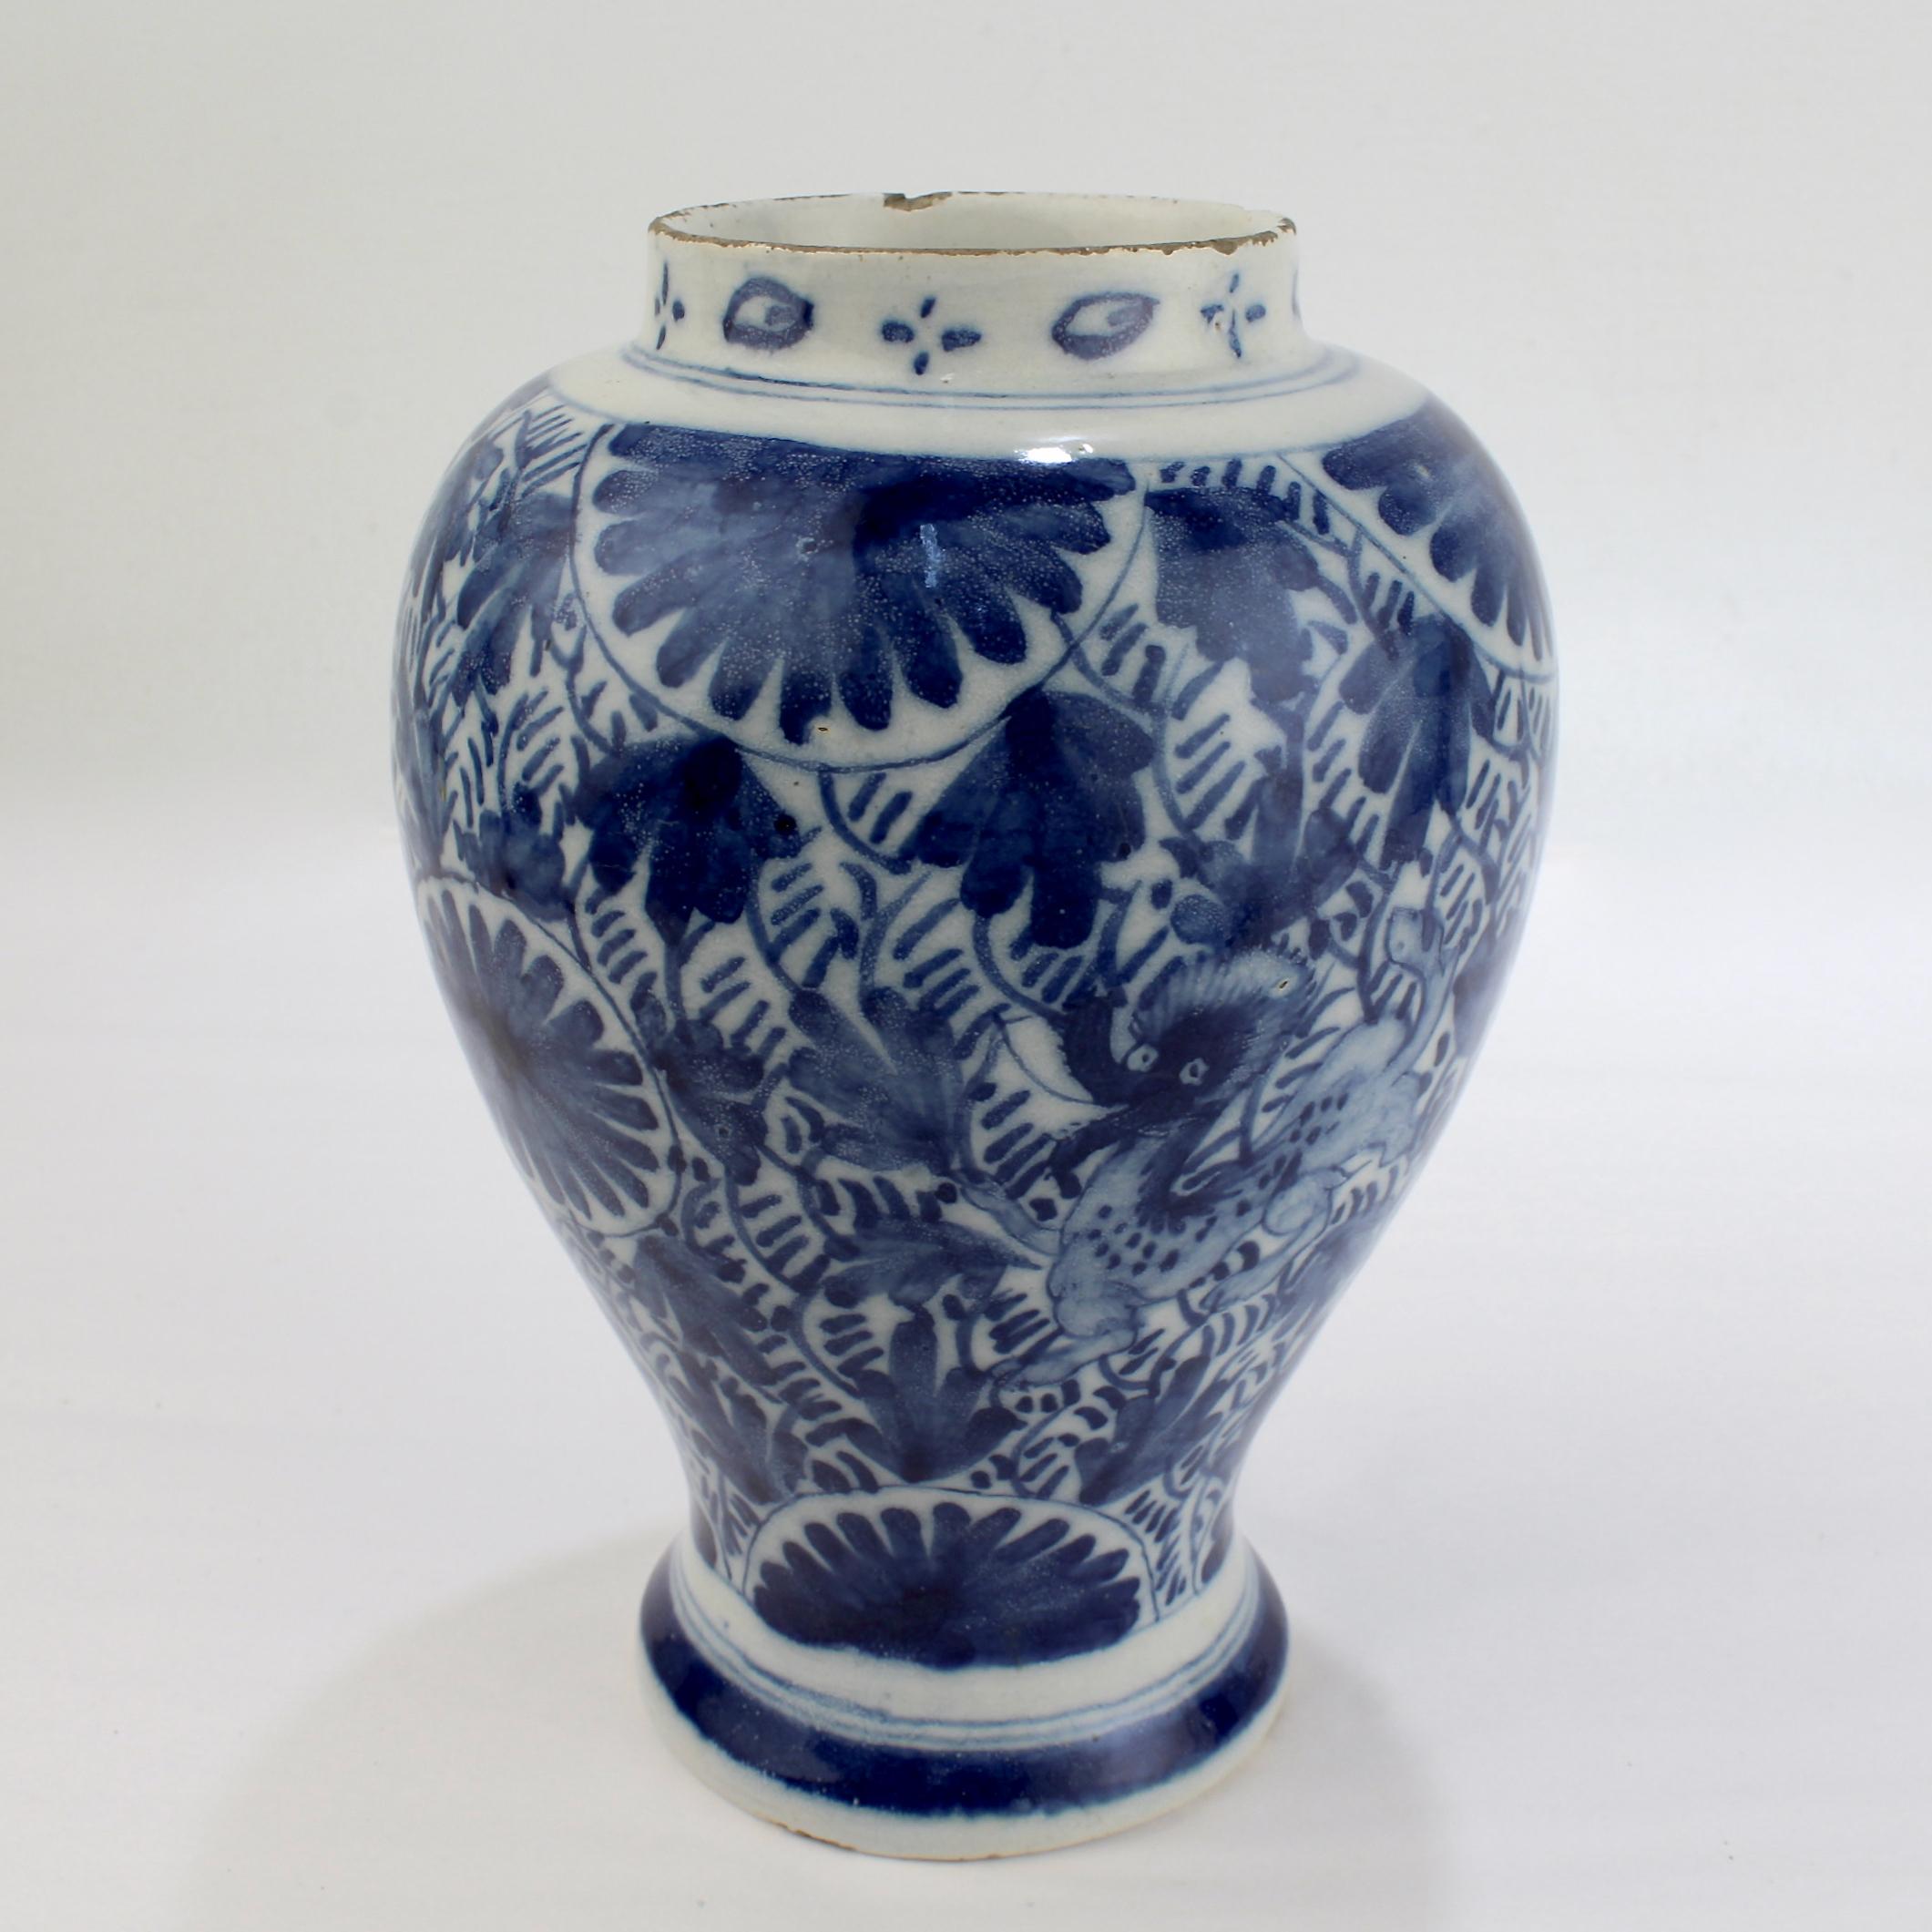 A fine antique Dutch Delft pottery jar.

The tin glazed vasi-form jar is richly decorated with blue underglaze flowers and foliage.

It also has a stylized dragon to the front and reverse. The base is unmarked.

Simply a fine diminutive